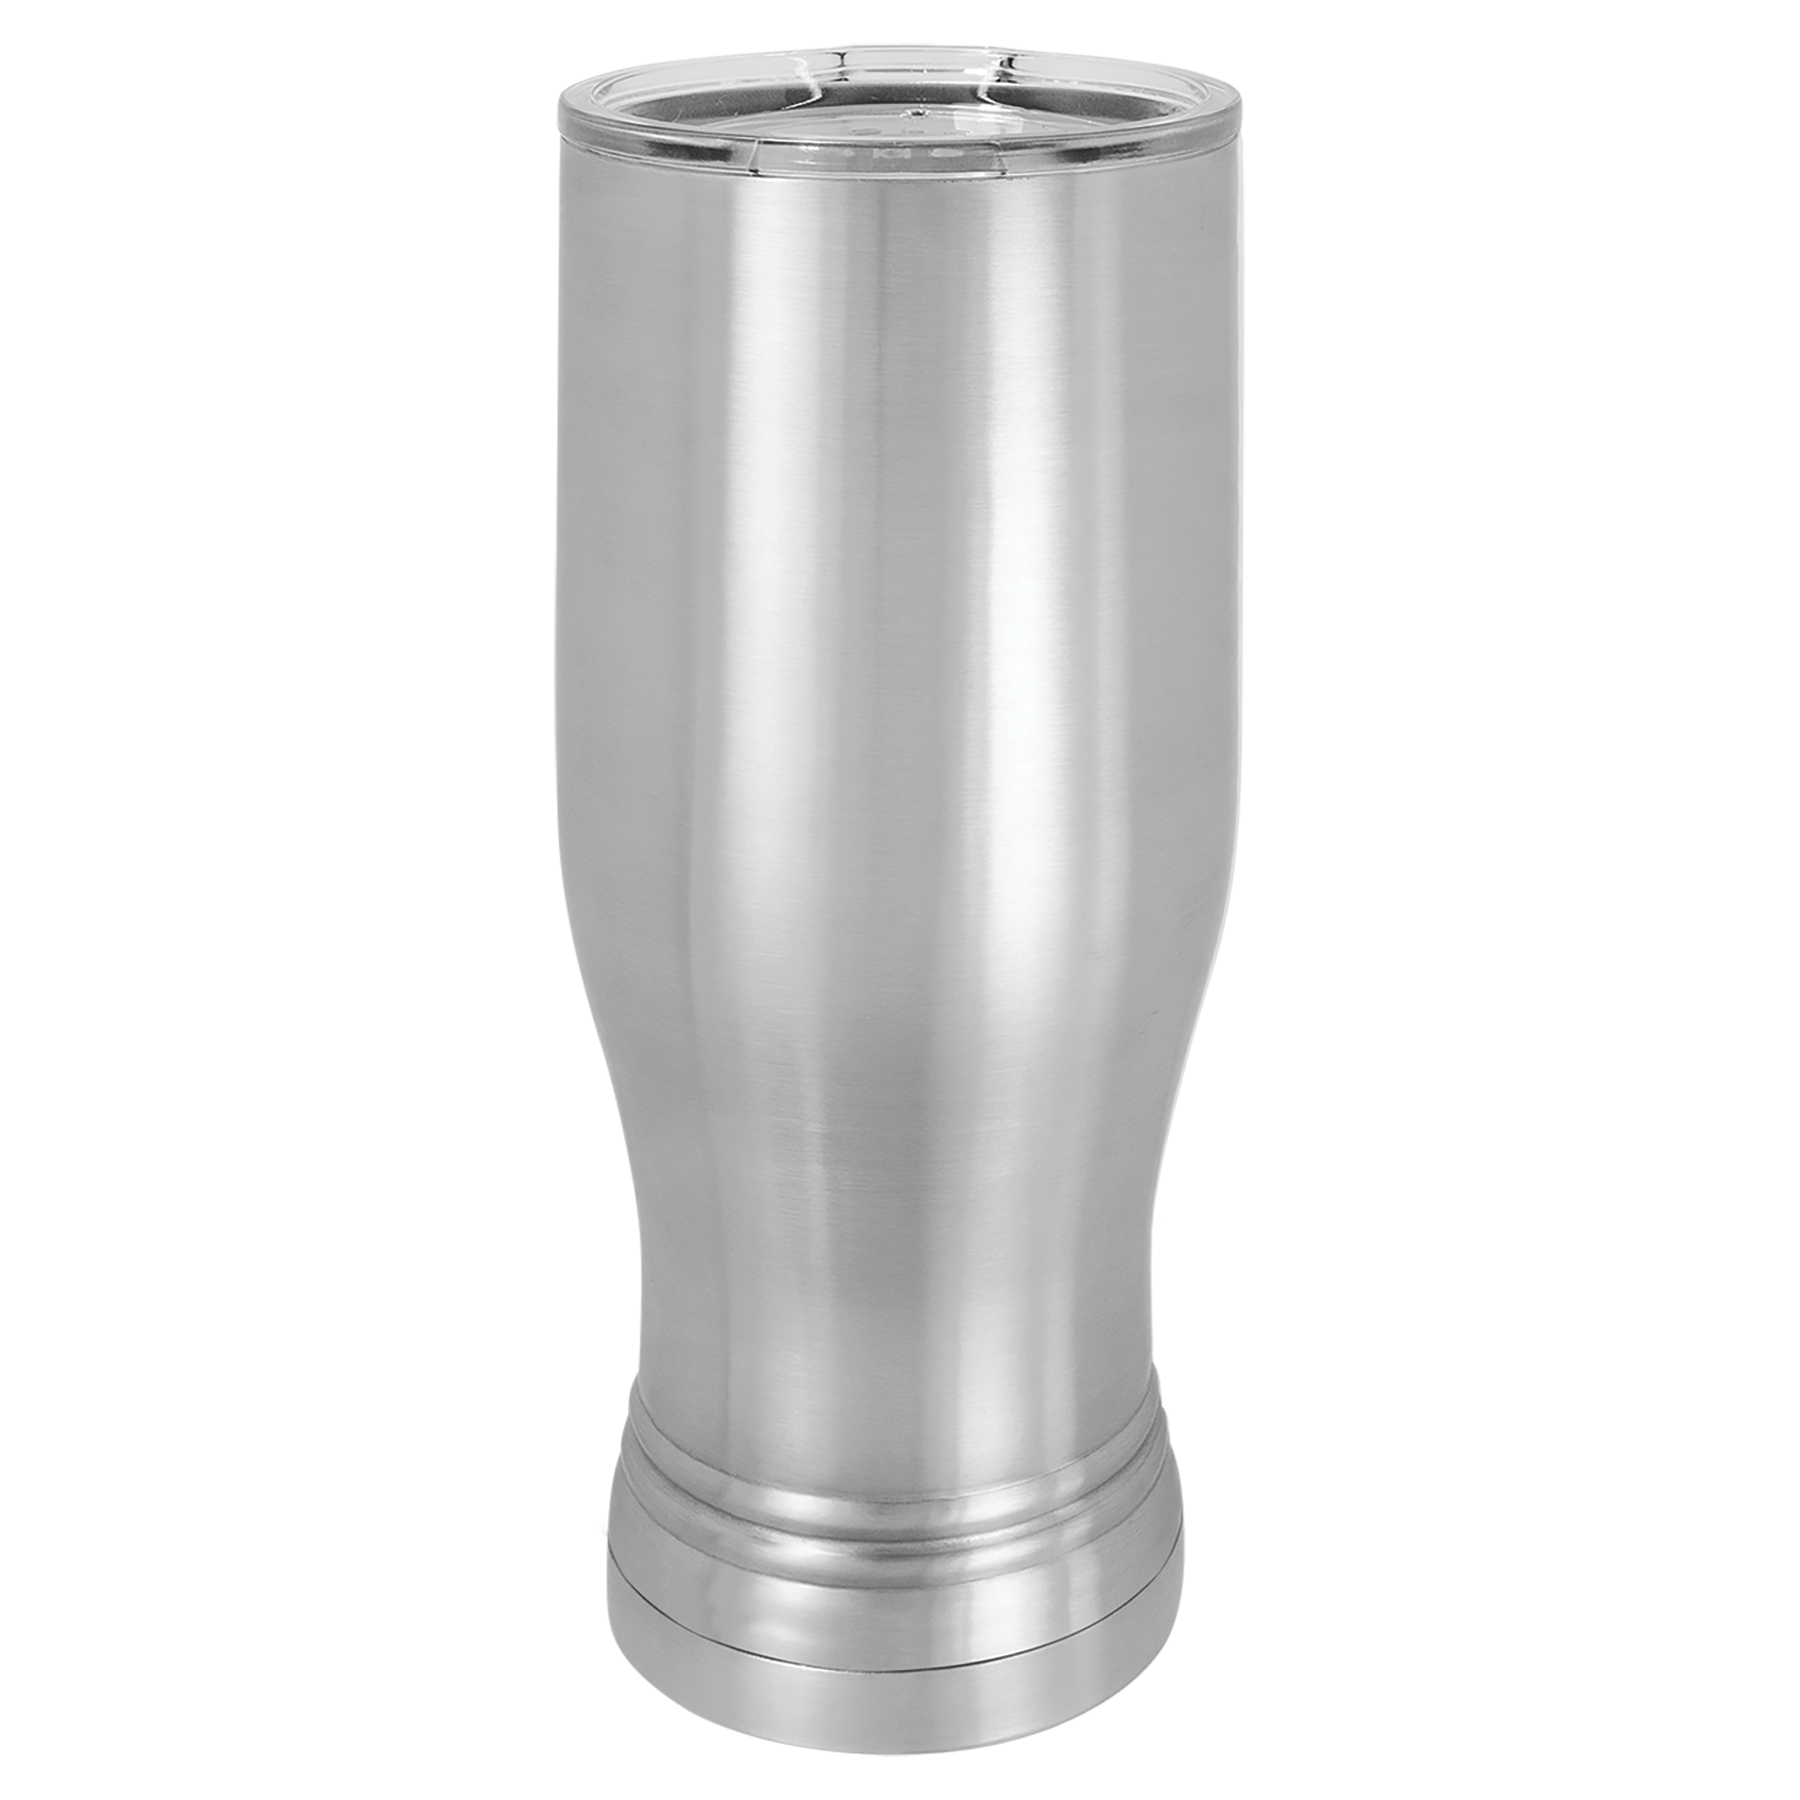 Stainless Steel 20oz Pilsner Tumbler-One Free Engraving -Fits most Cup Holders -Double-wall Vacuum Insulated -Made from 18/8 Gauge Stainless Steel (Type 304 Food Grade) -Lid is BPA Free (Hand Wash Only) -Not recommended for Dishwasher -Works with Cold and Hot Drinks -17 Color Options -Perfect for Personalized Gifts, Awards, Incentives, Swag & Fundraisers